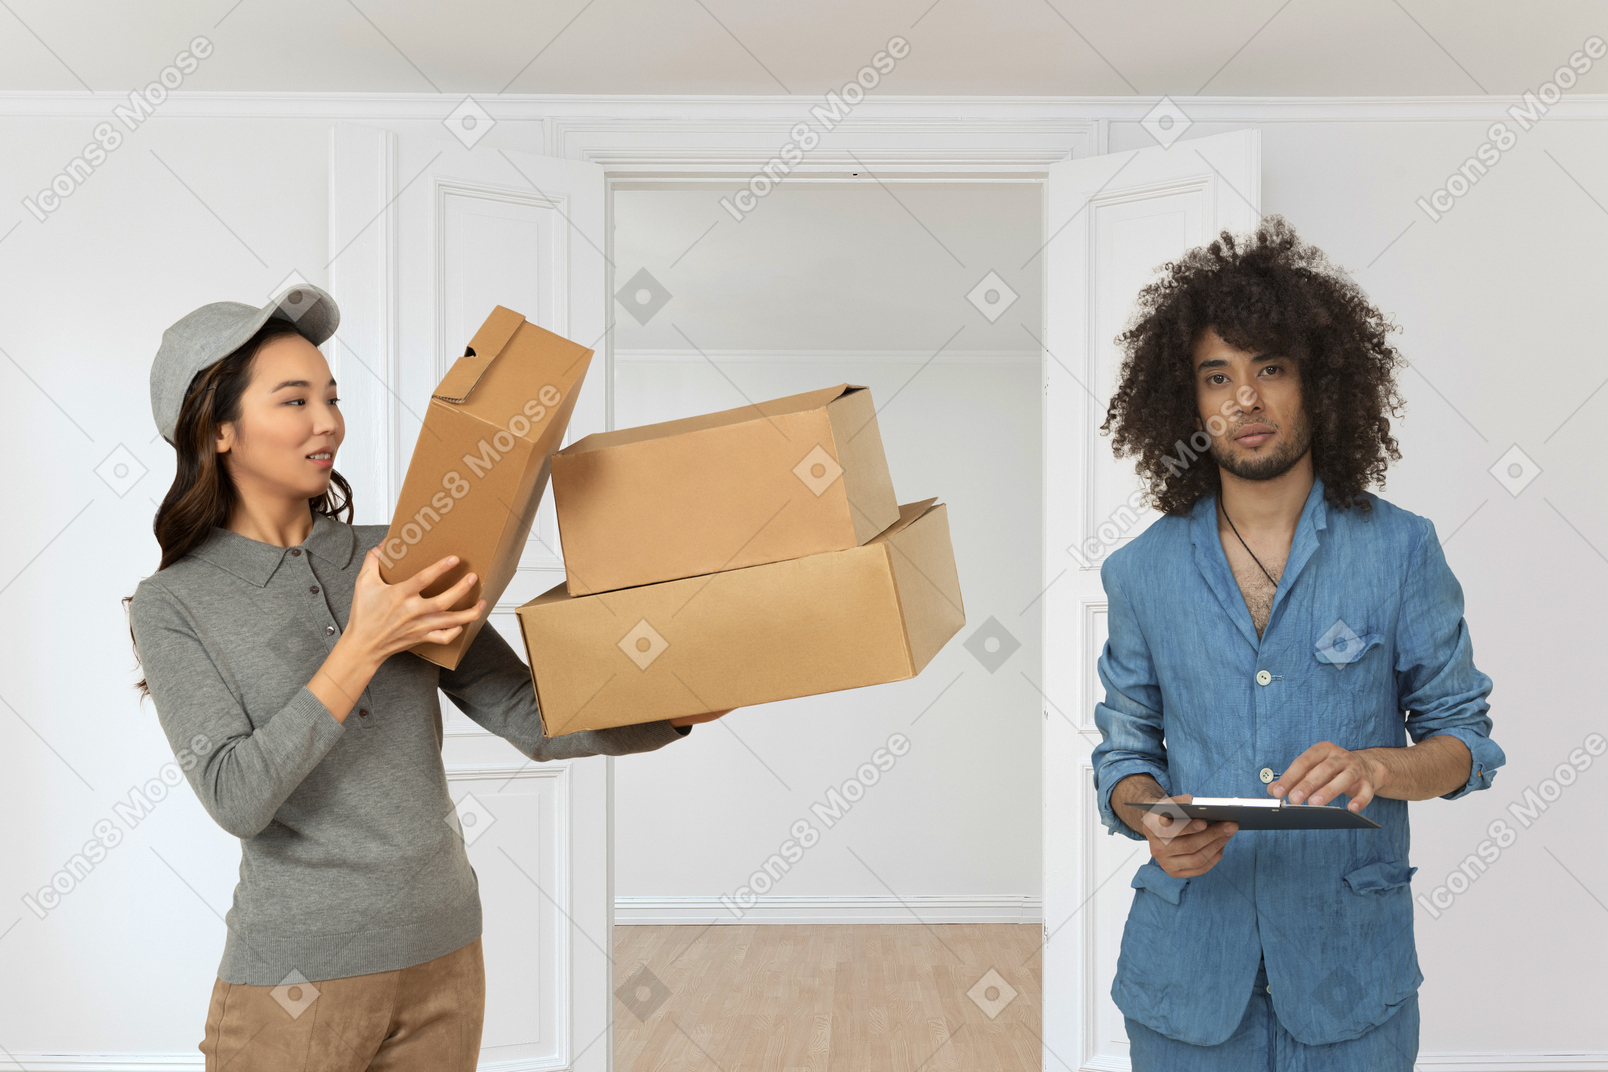 A deliverywoman with packages and a man signing papers